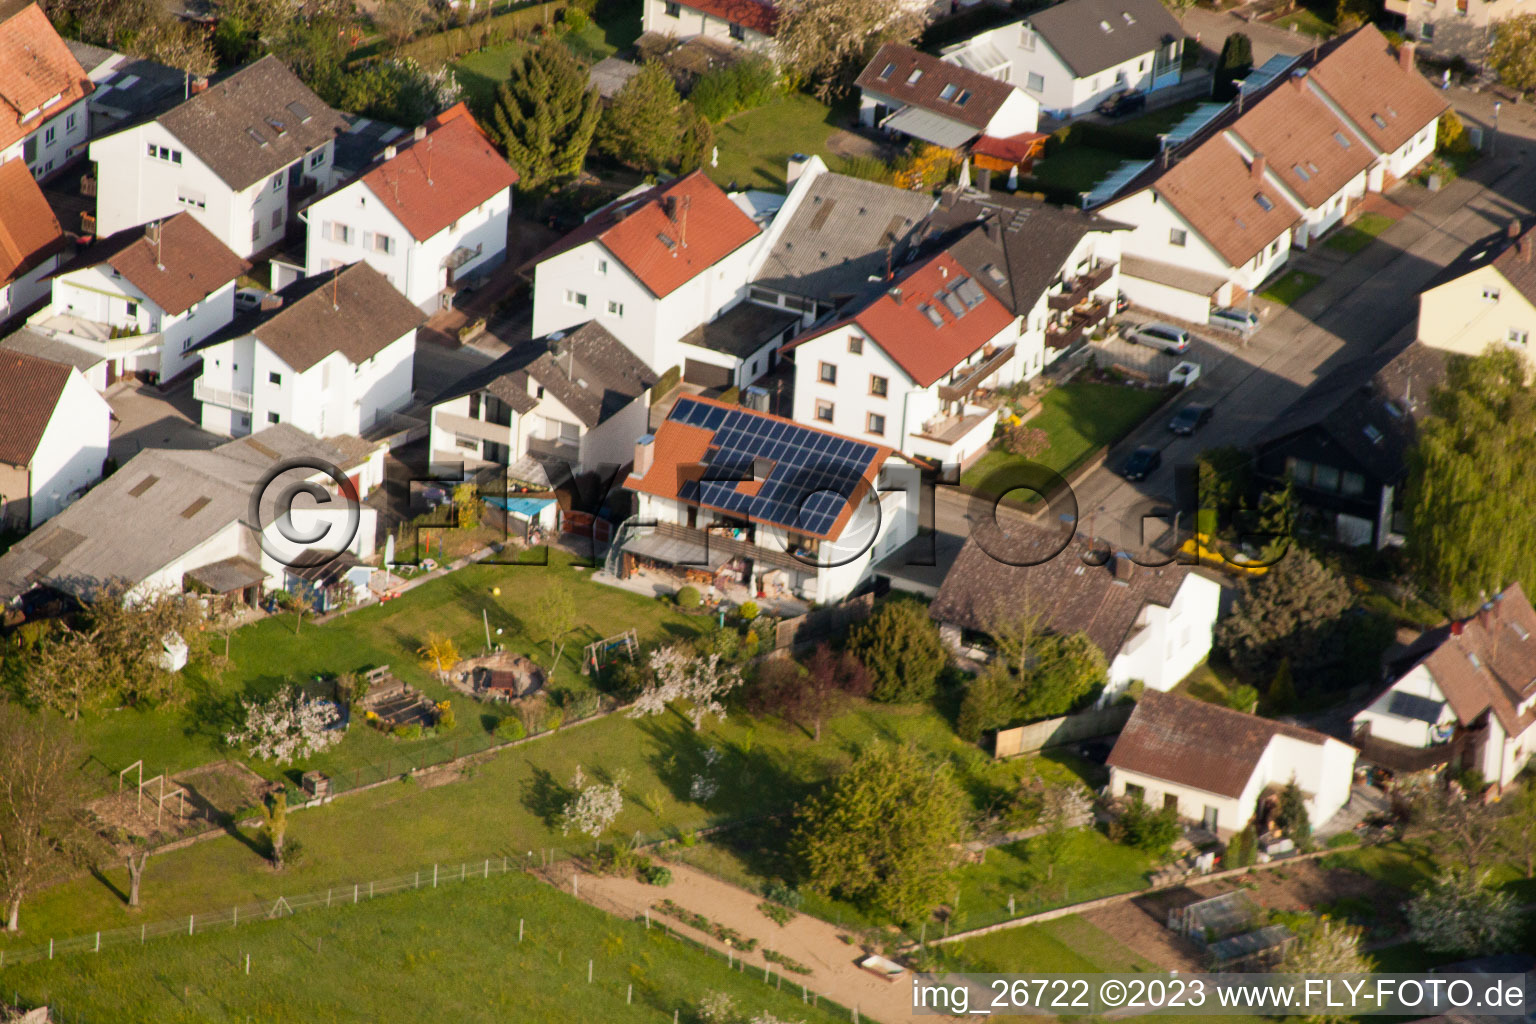 District Stupferich in Karlsruhe in the state Baden-Wuerttemberg, Germany viewn from the air